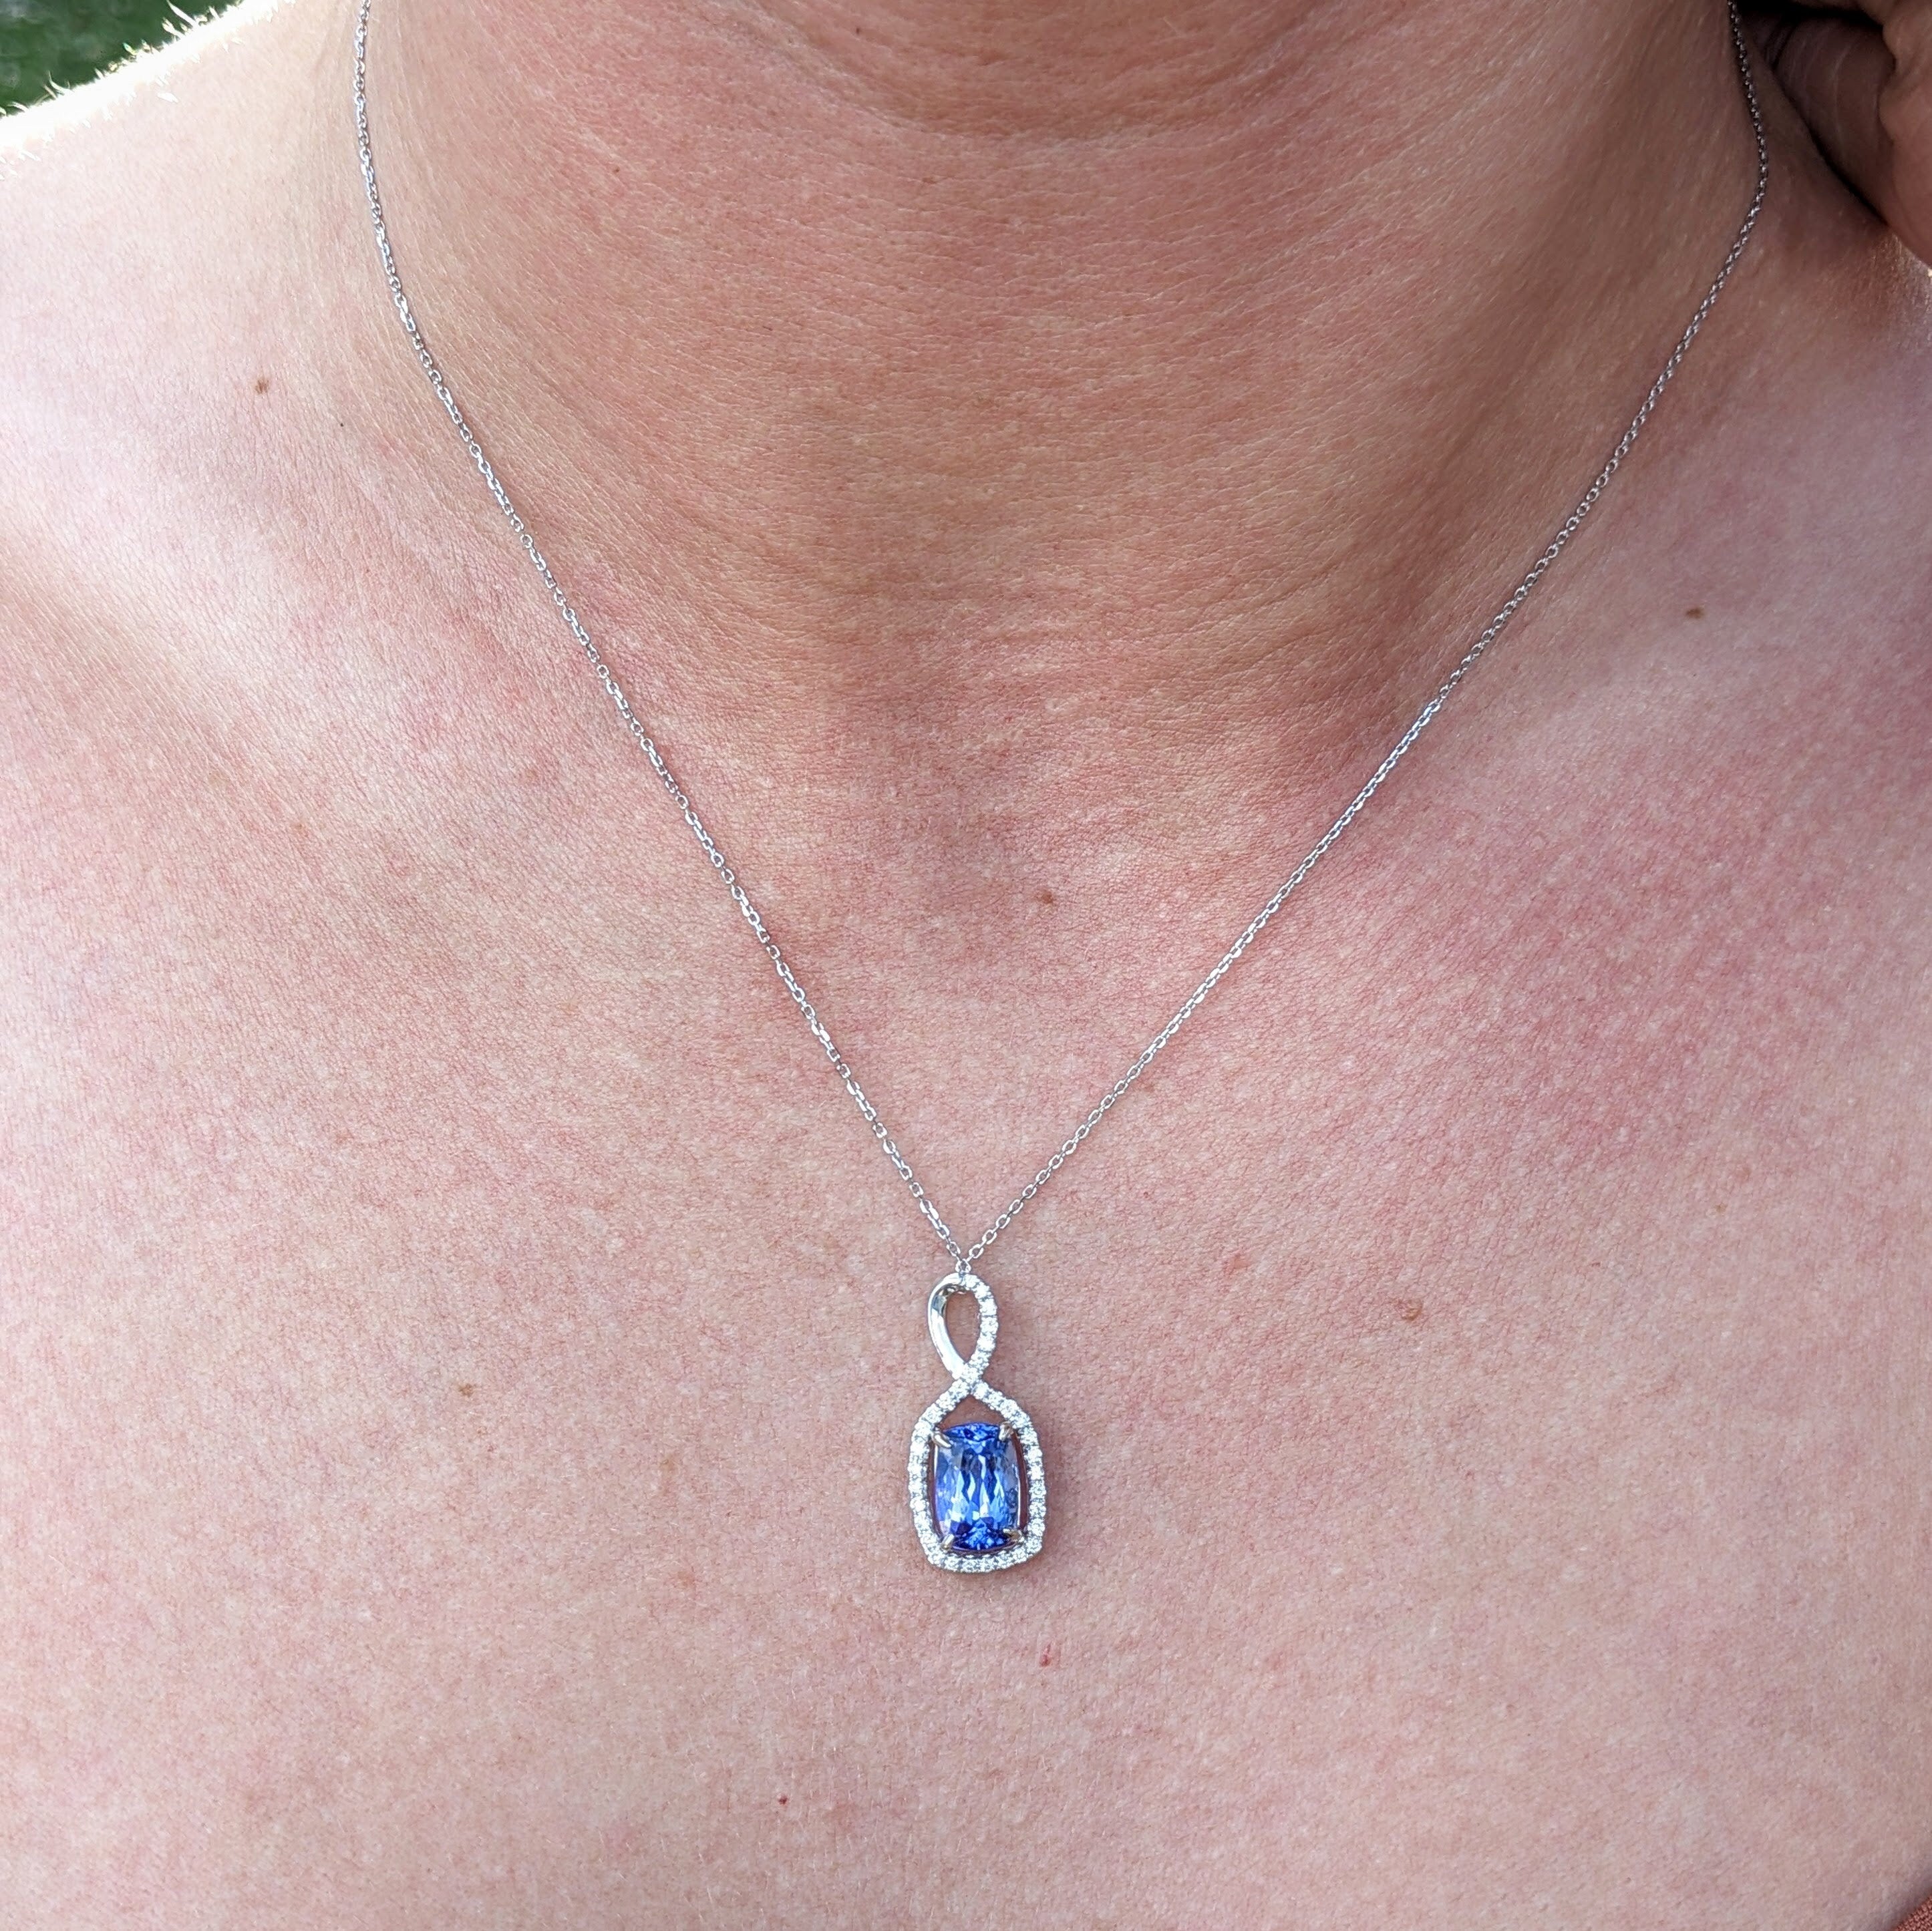 Pendants-Tanzanite Pendant in Solid 14k White Gold w Diamonds || Elongated Cushion Cut 9x7mm || December Birthstone || All Natural Earth Mined Gems - NNJGemstones